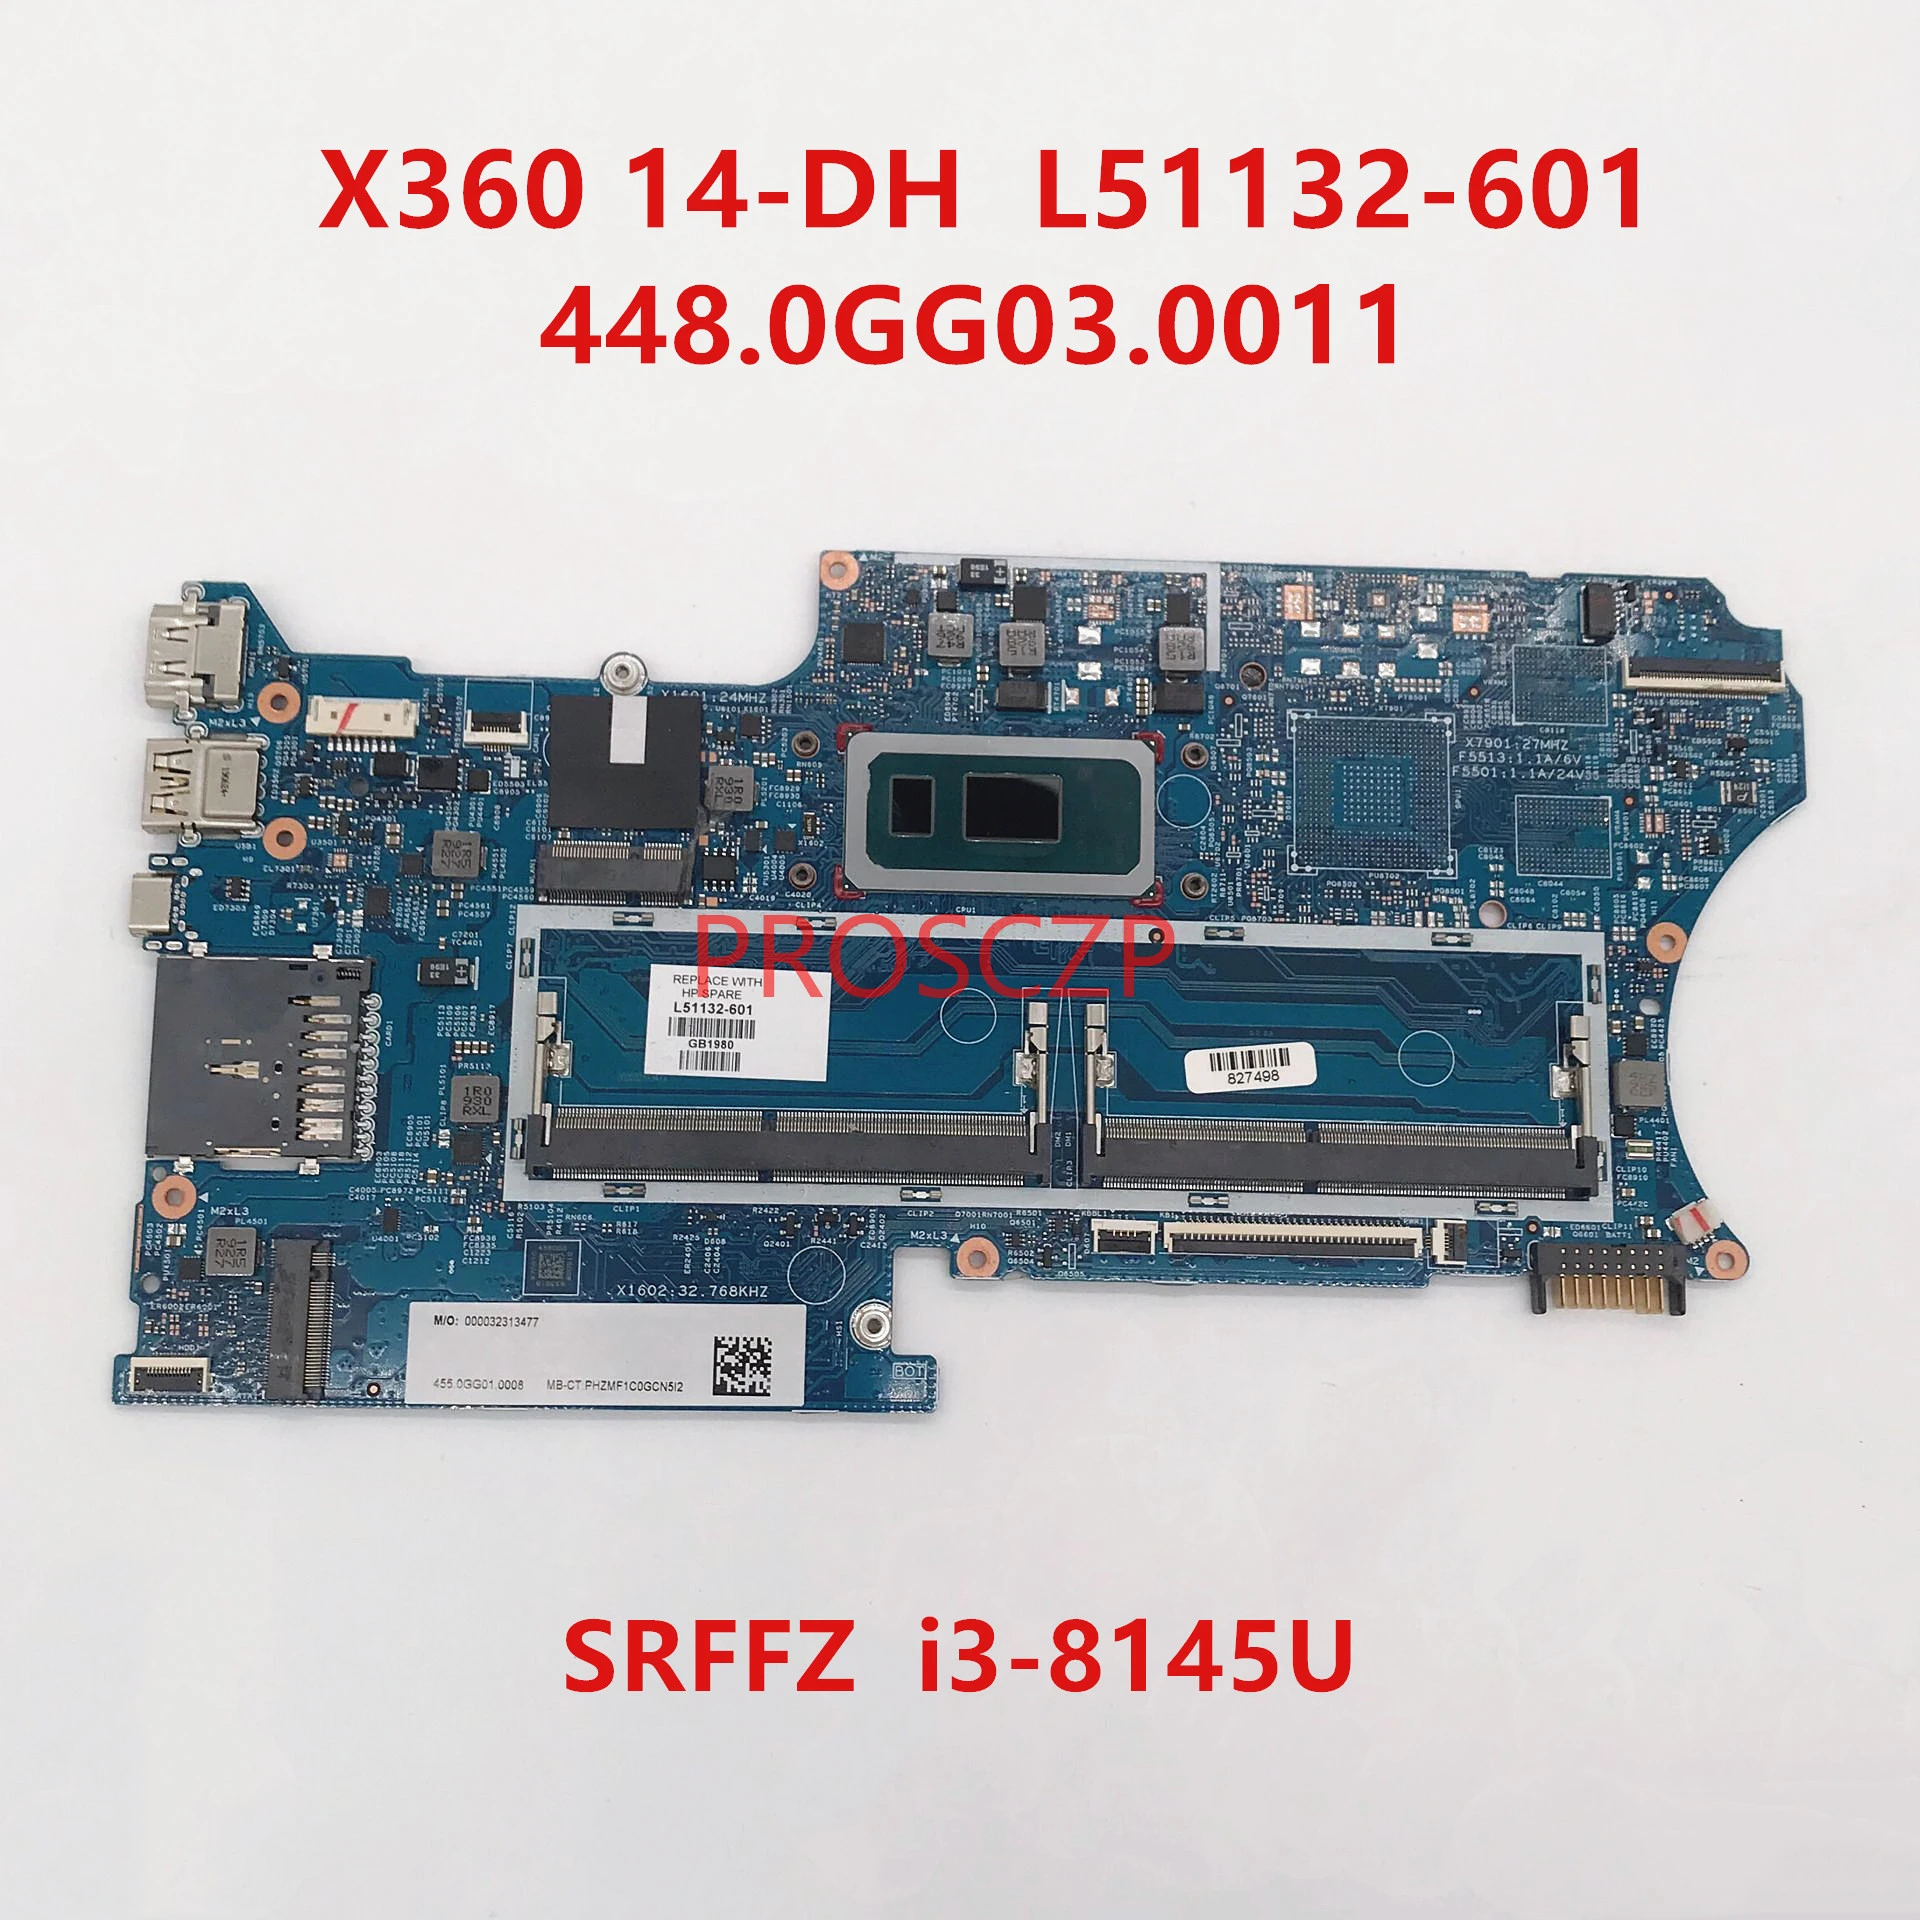 motherboards computer For HP X360 14-DH L51132-601 L51132-001 Laptop Motherboard 18742-1 448.0GG03.0011 With SRFFZ  I3-8145U CPU 100% Working Well best cheap motherboard for gaming pc